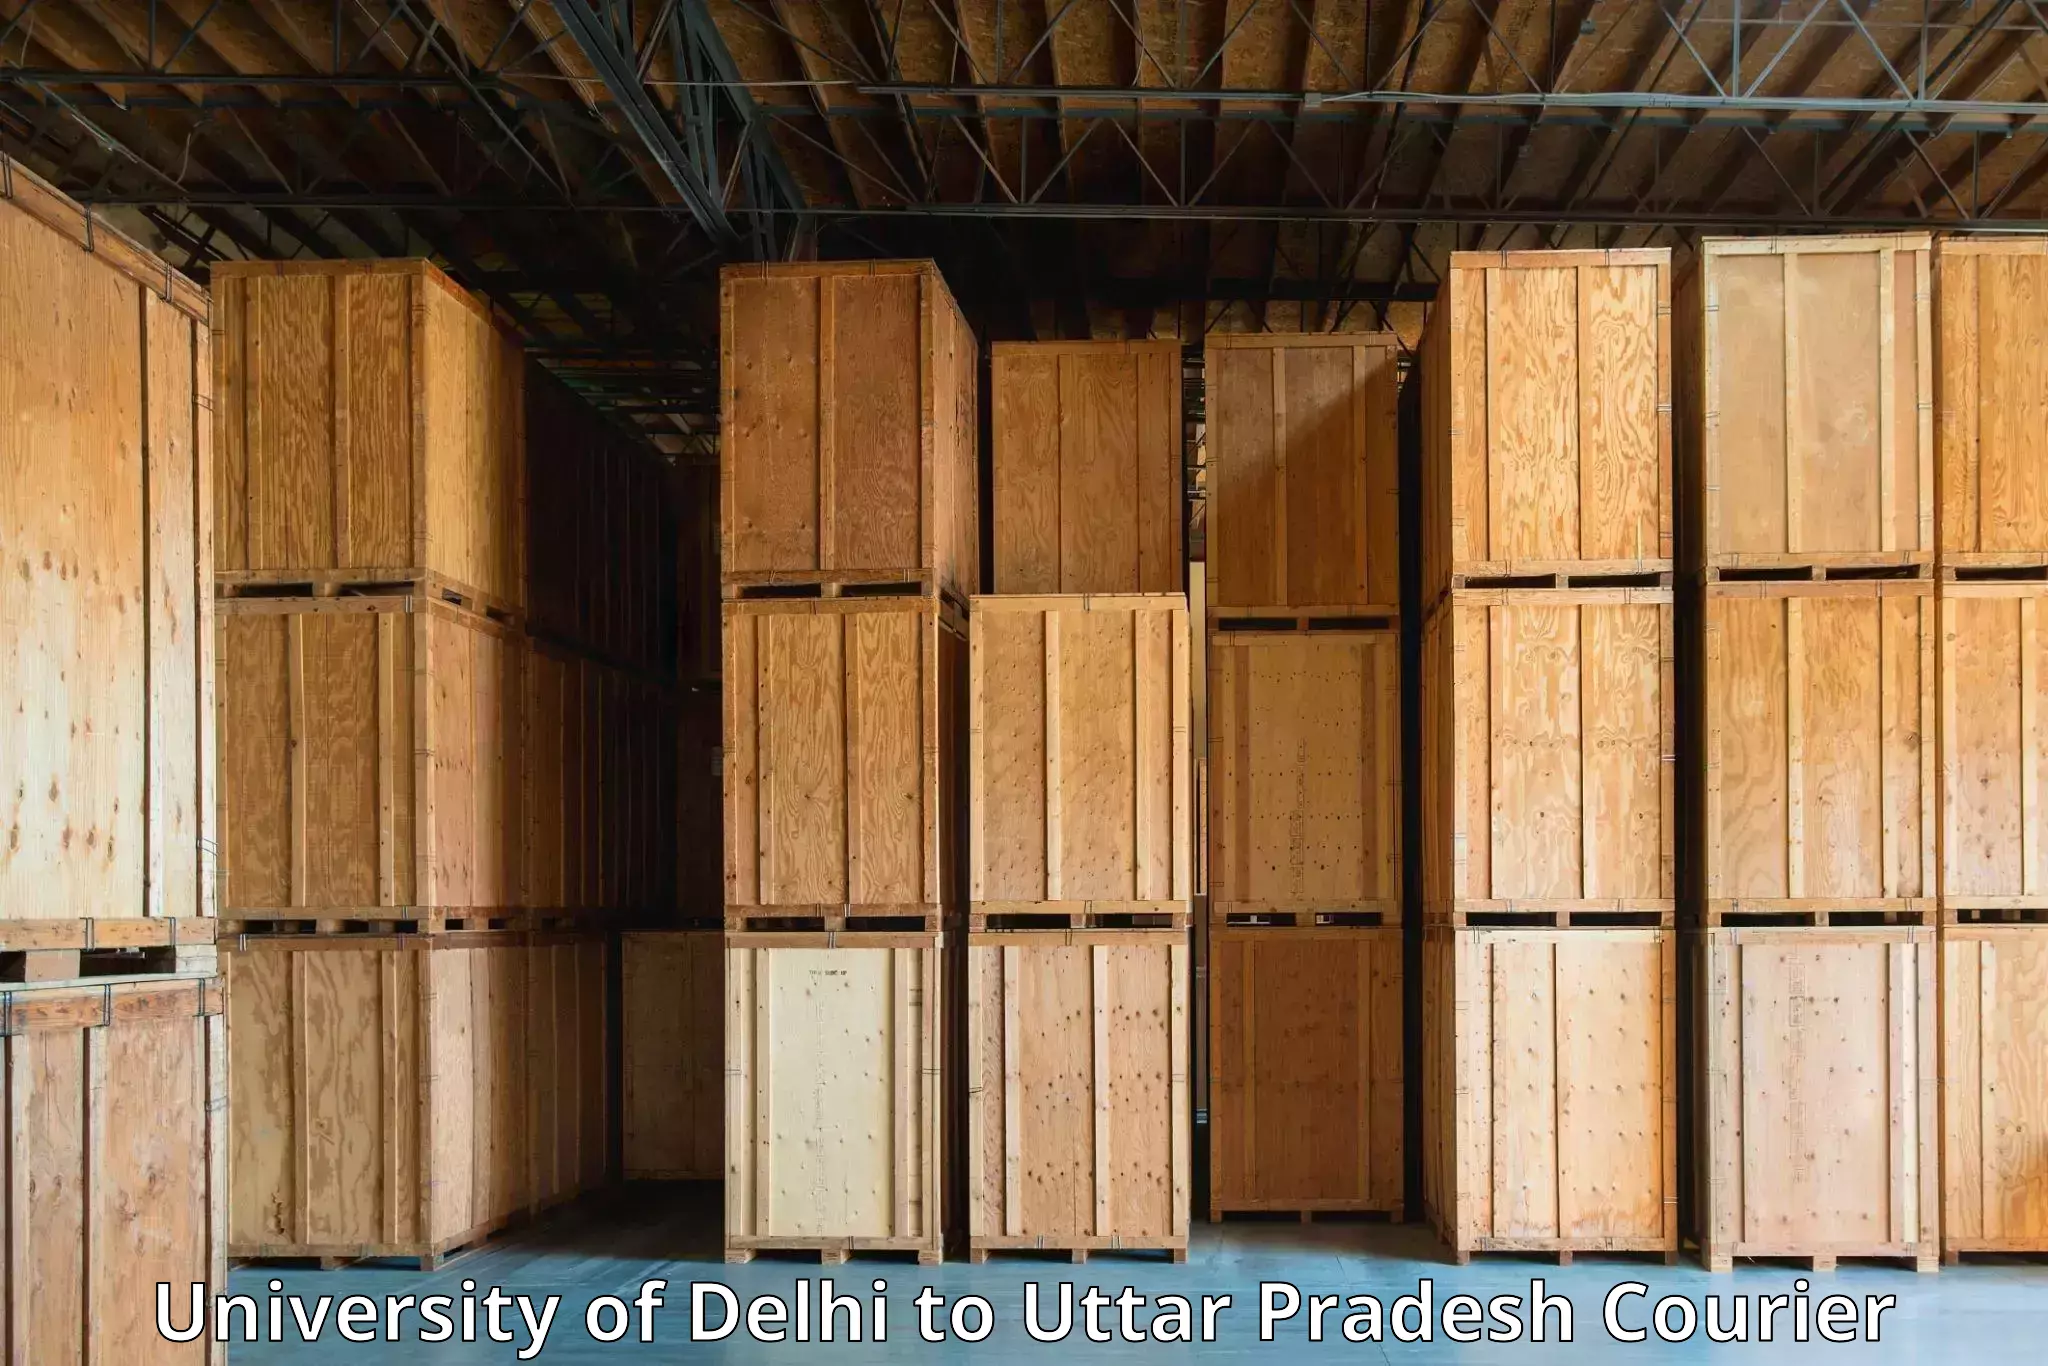 Sustainable delivery practices University of Delhi to Sant Ravidas Nagar